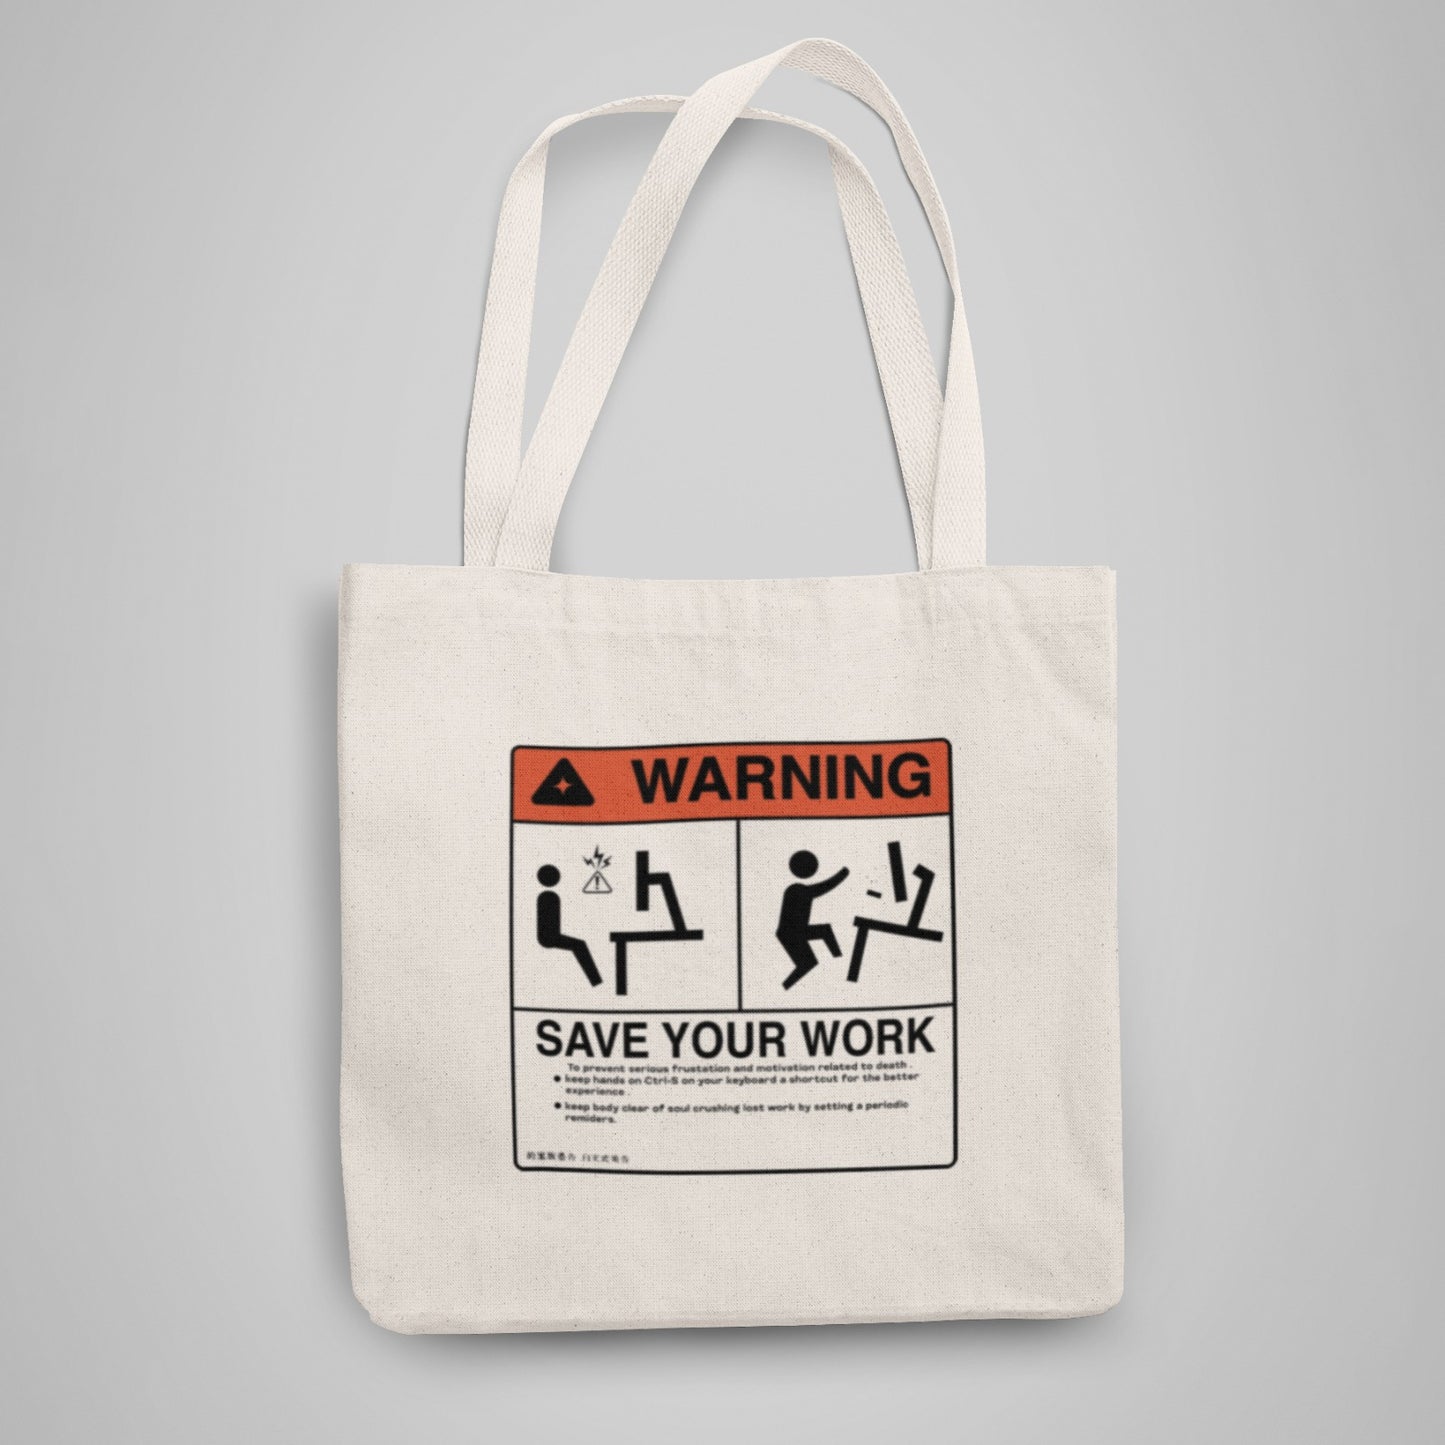 Save your work warning Tote Bag With Zipper by @pankaj.230_5